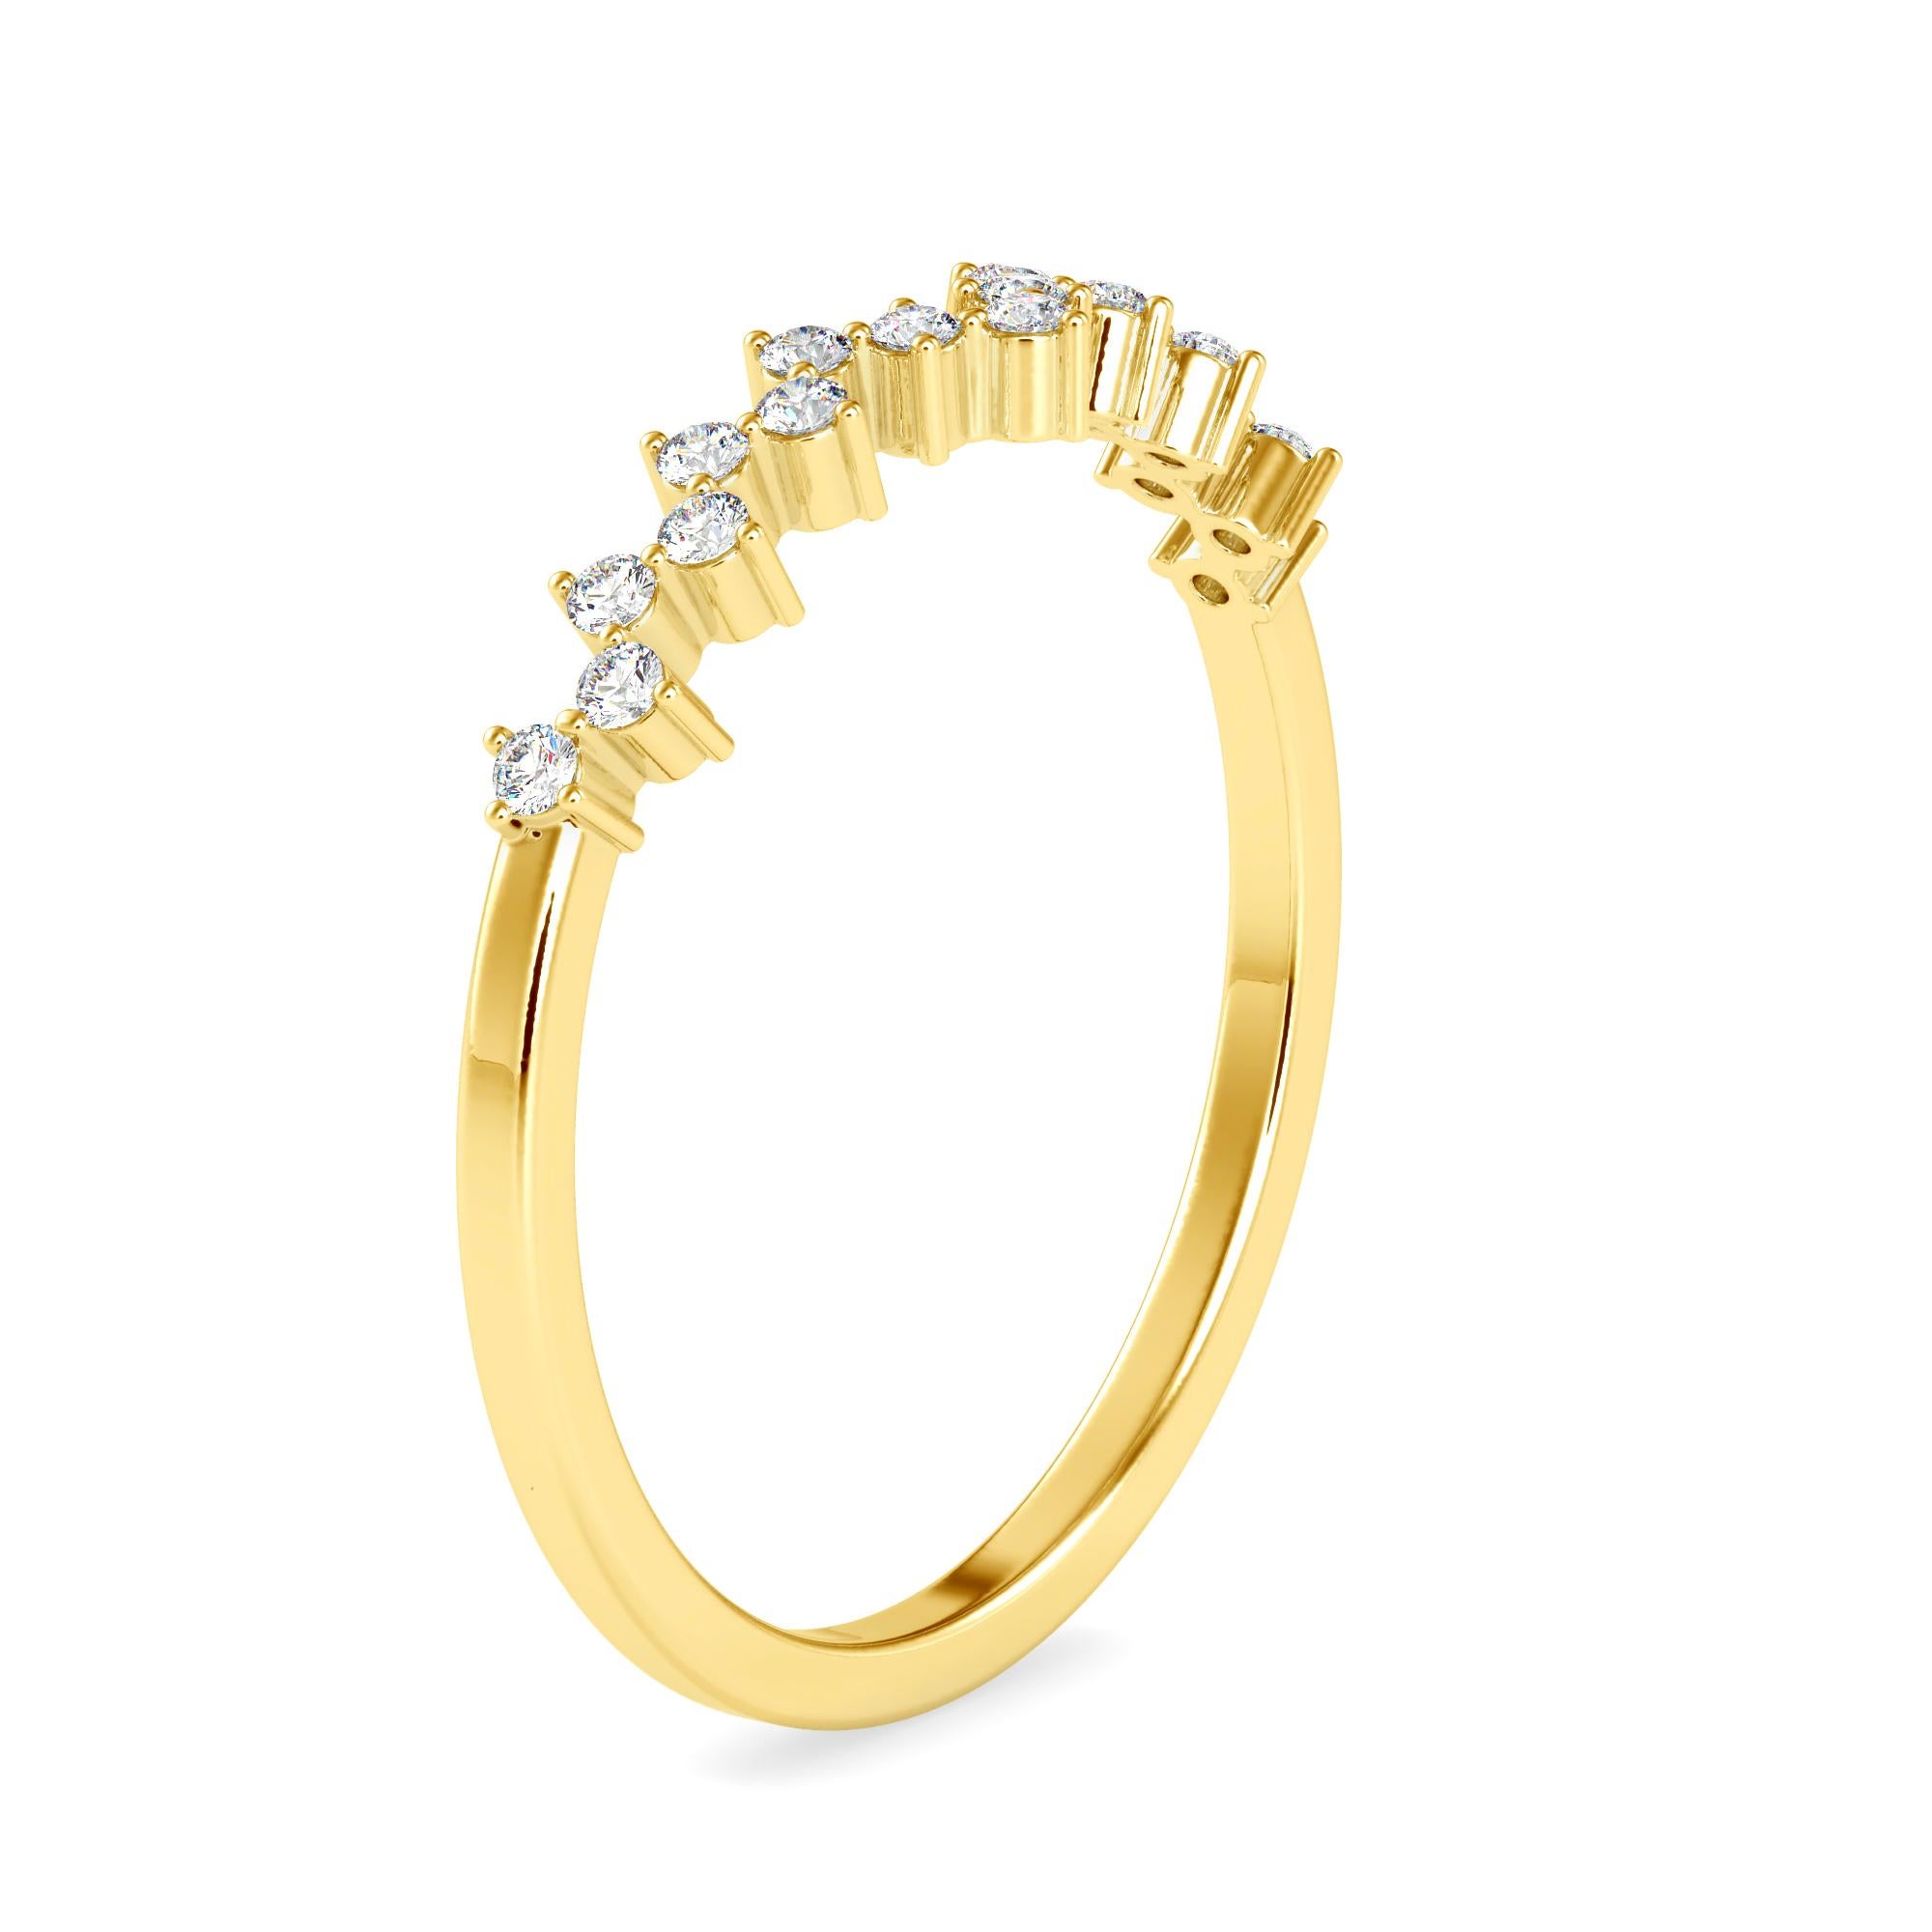 0.11 Carat Diamond 14K Yellow Gold Ring In New Condition For Sale In Los Angeles, CA